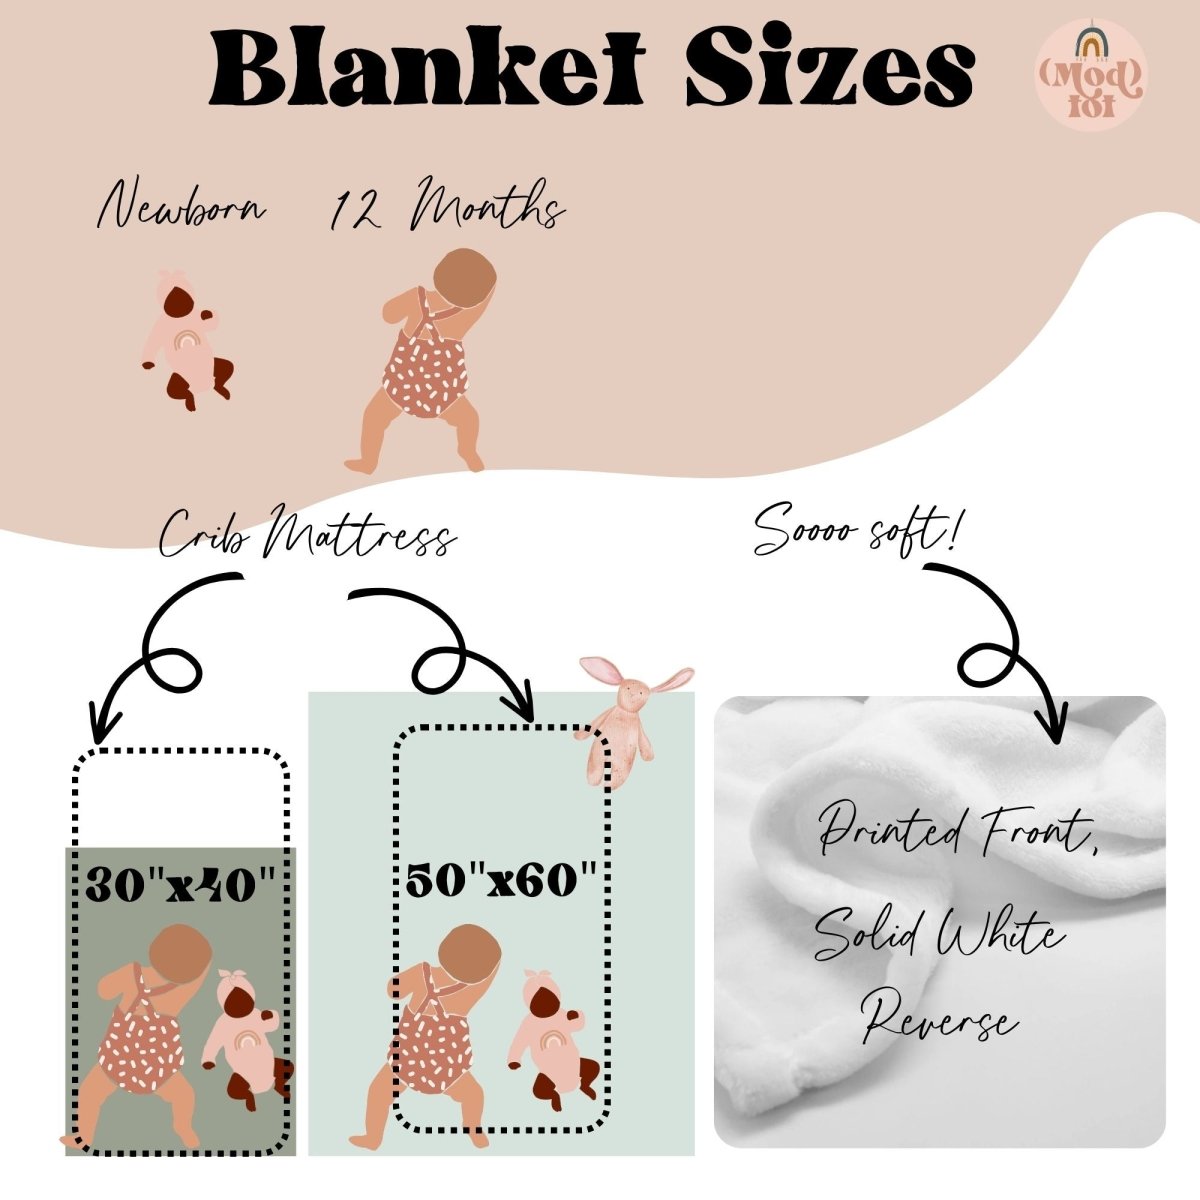 Floral Jungle Personalized Minky Blanket - Floral Jungle, gender_girl, Personalized_Yes